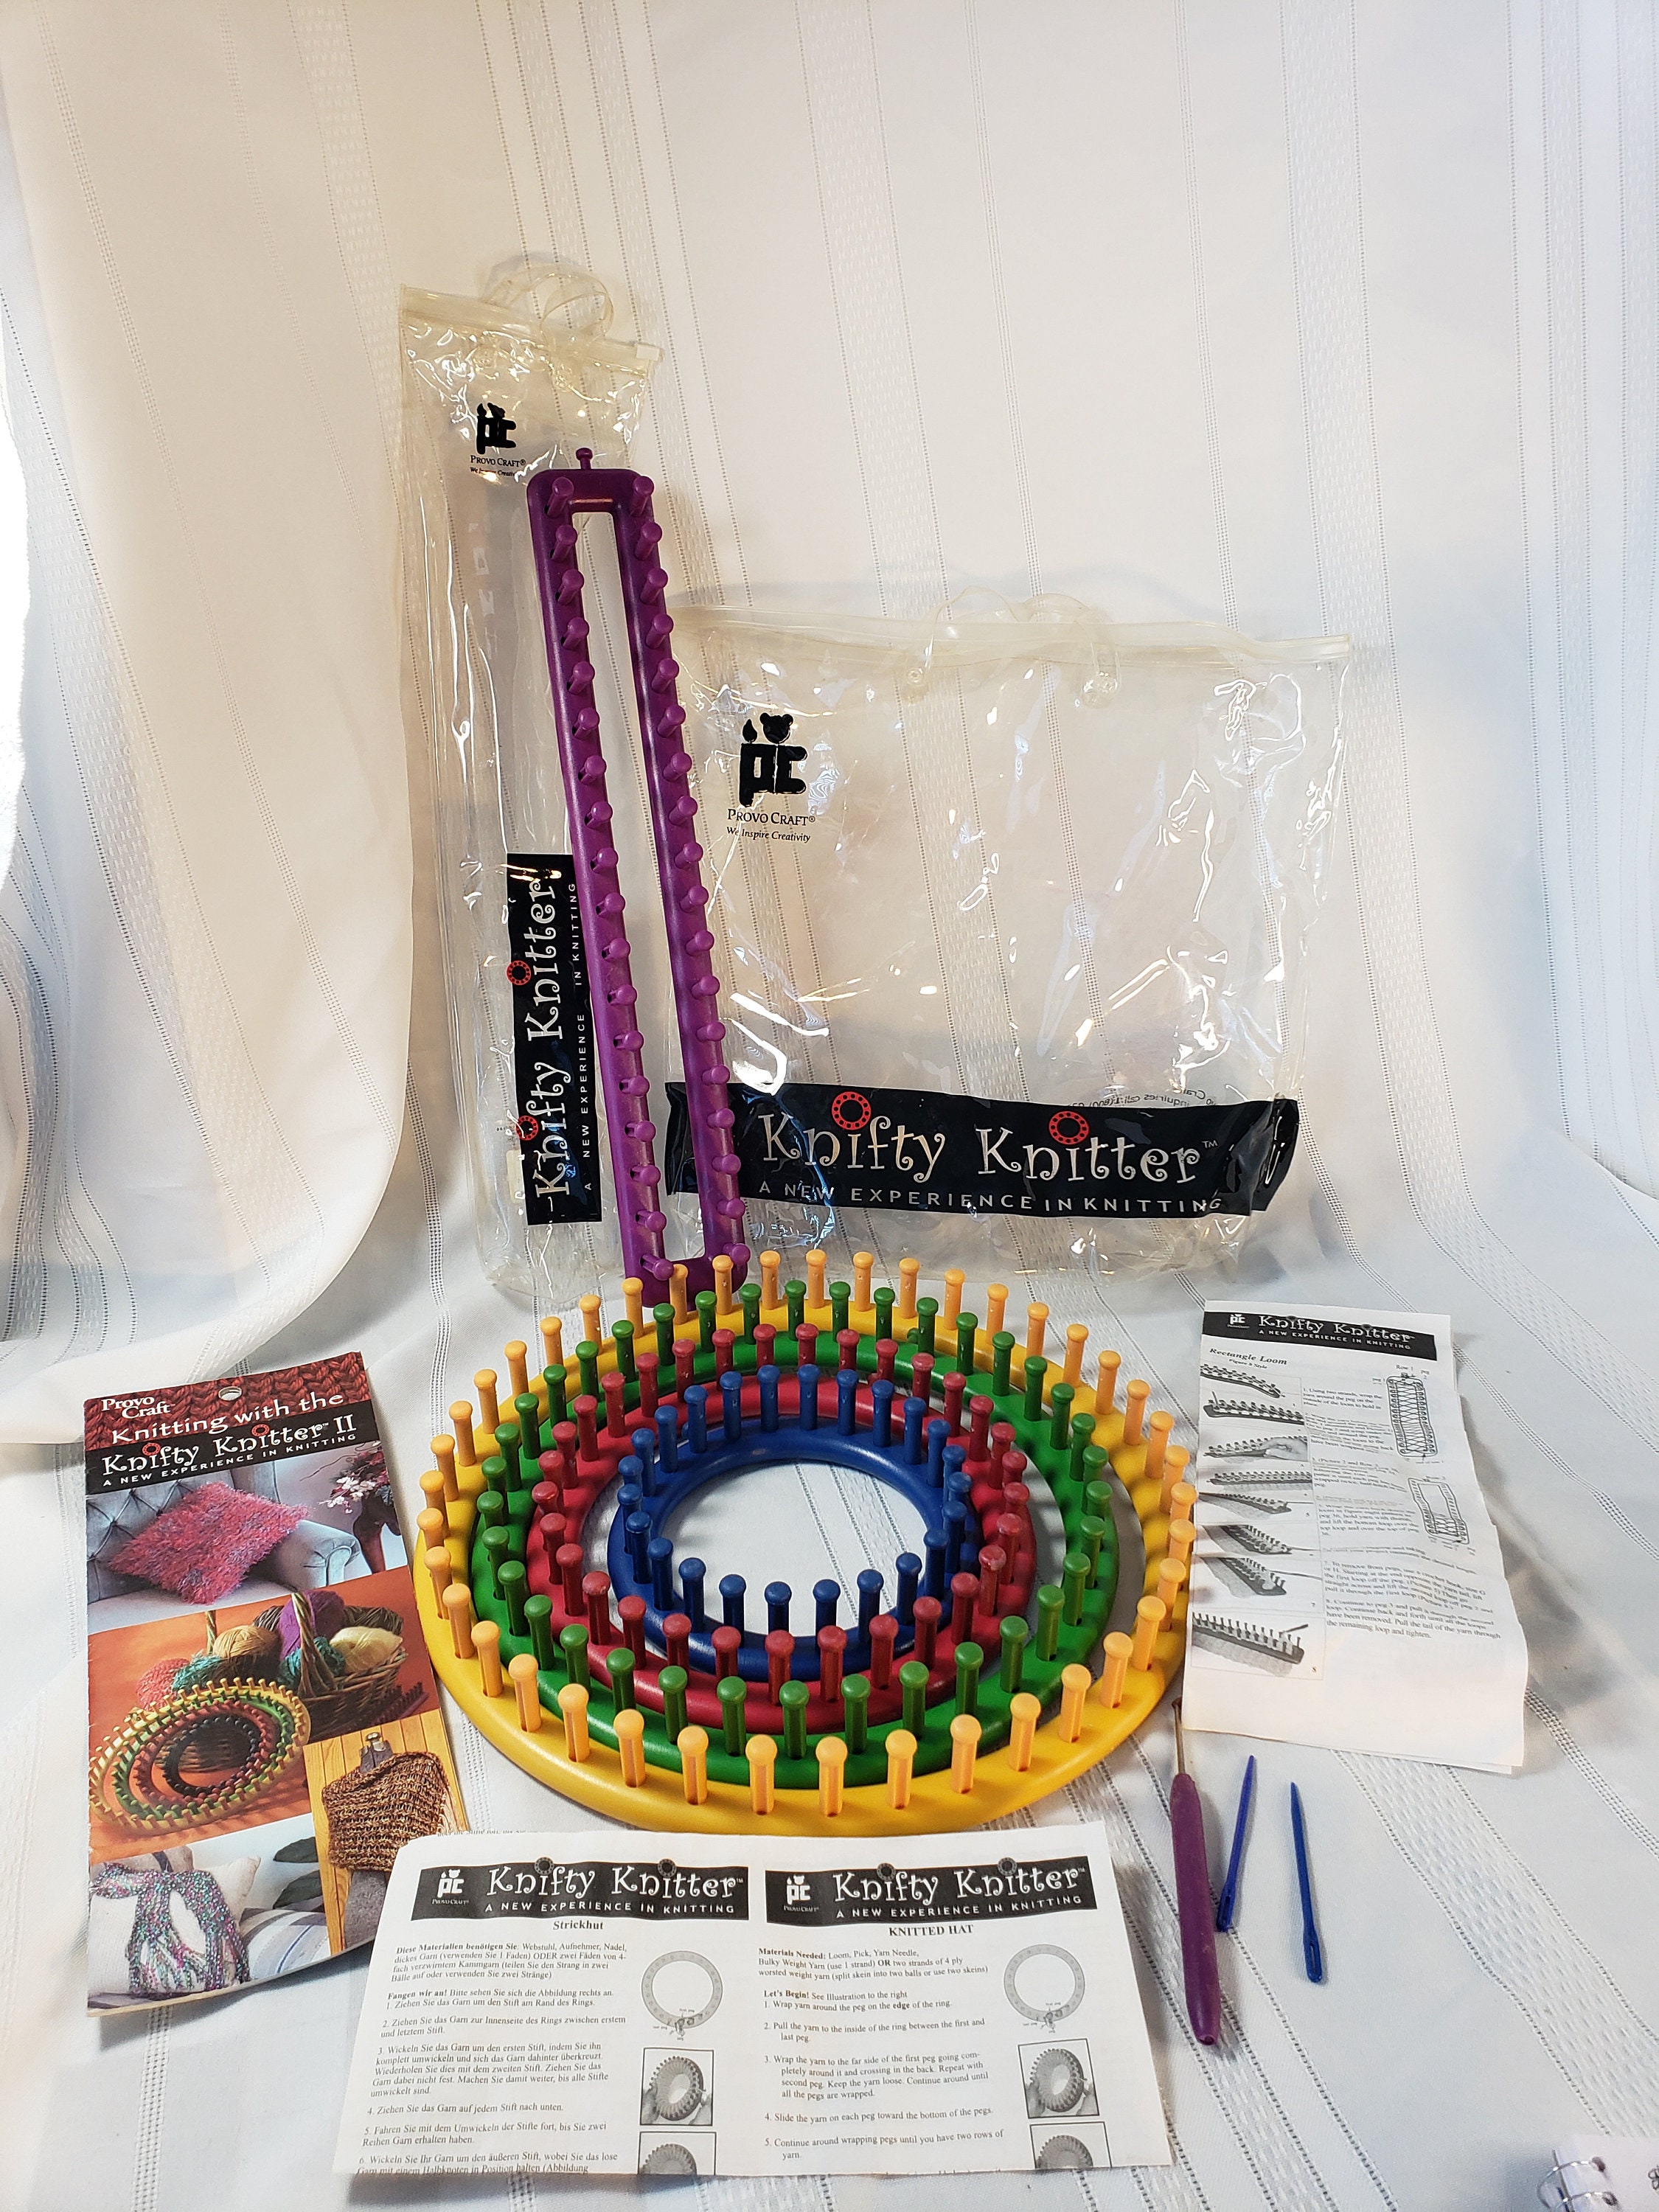  Genuine Knifty Knitter Round Loom Set with 4 Looms, Hook & Bag